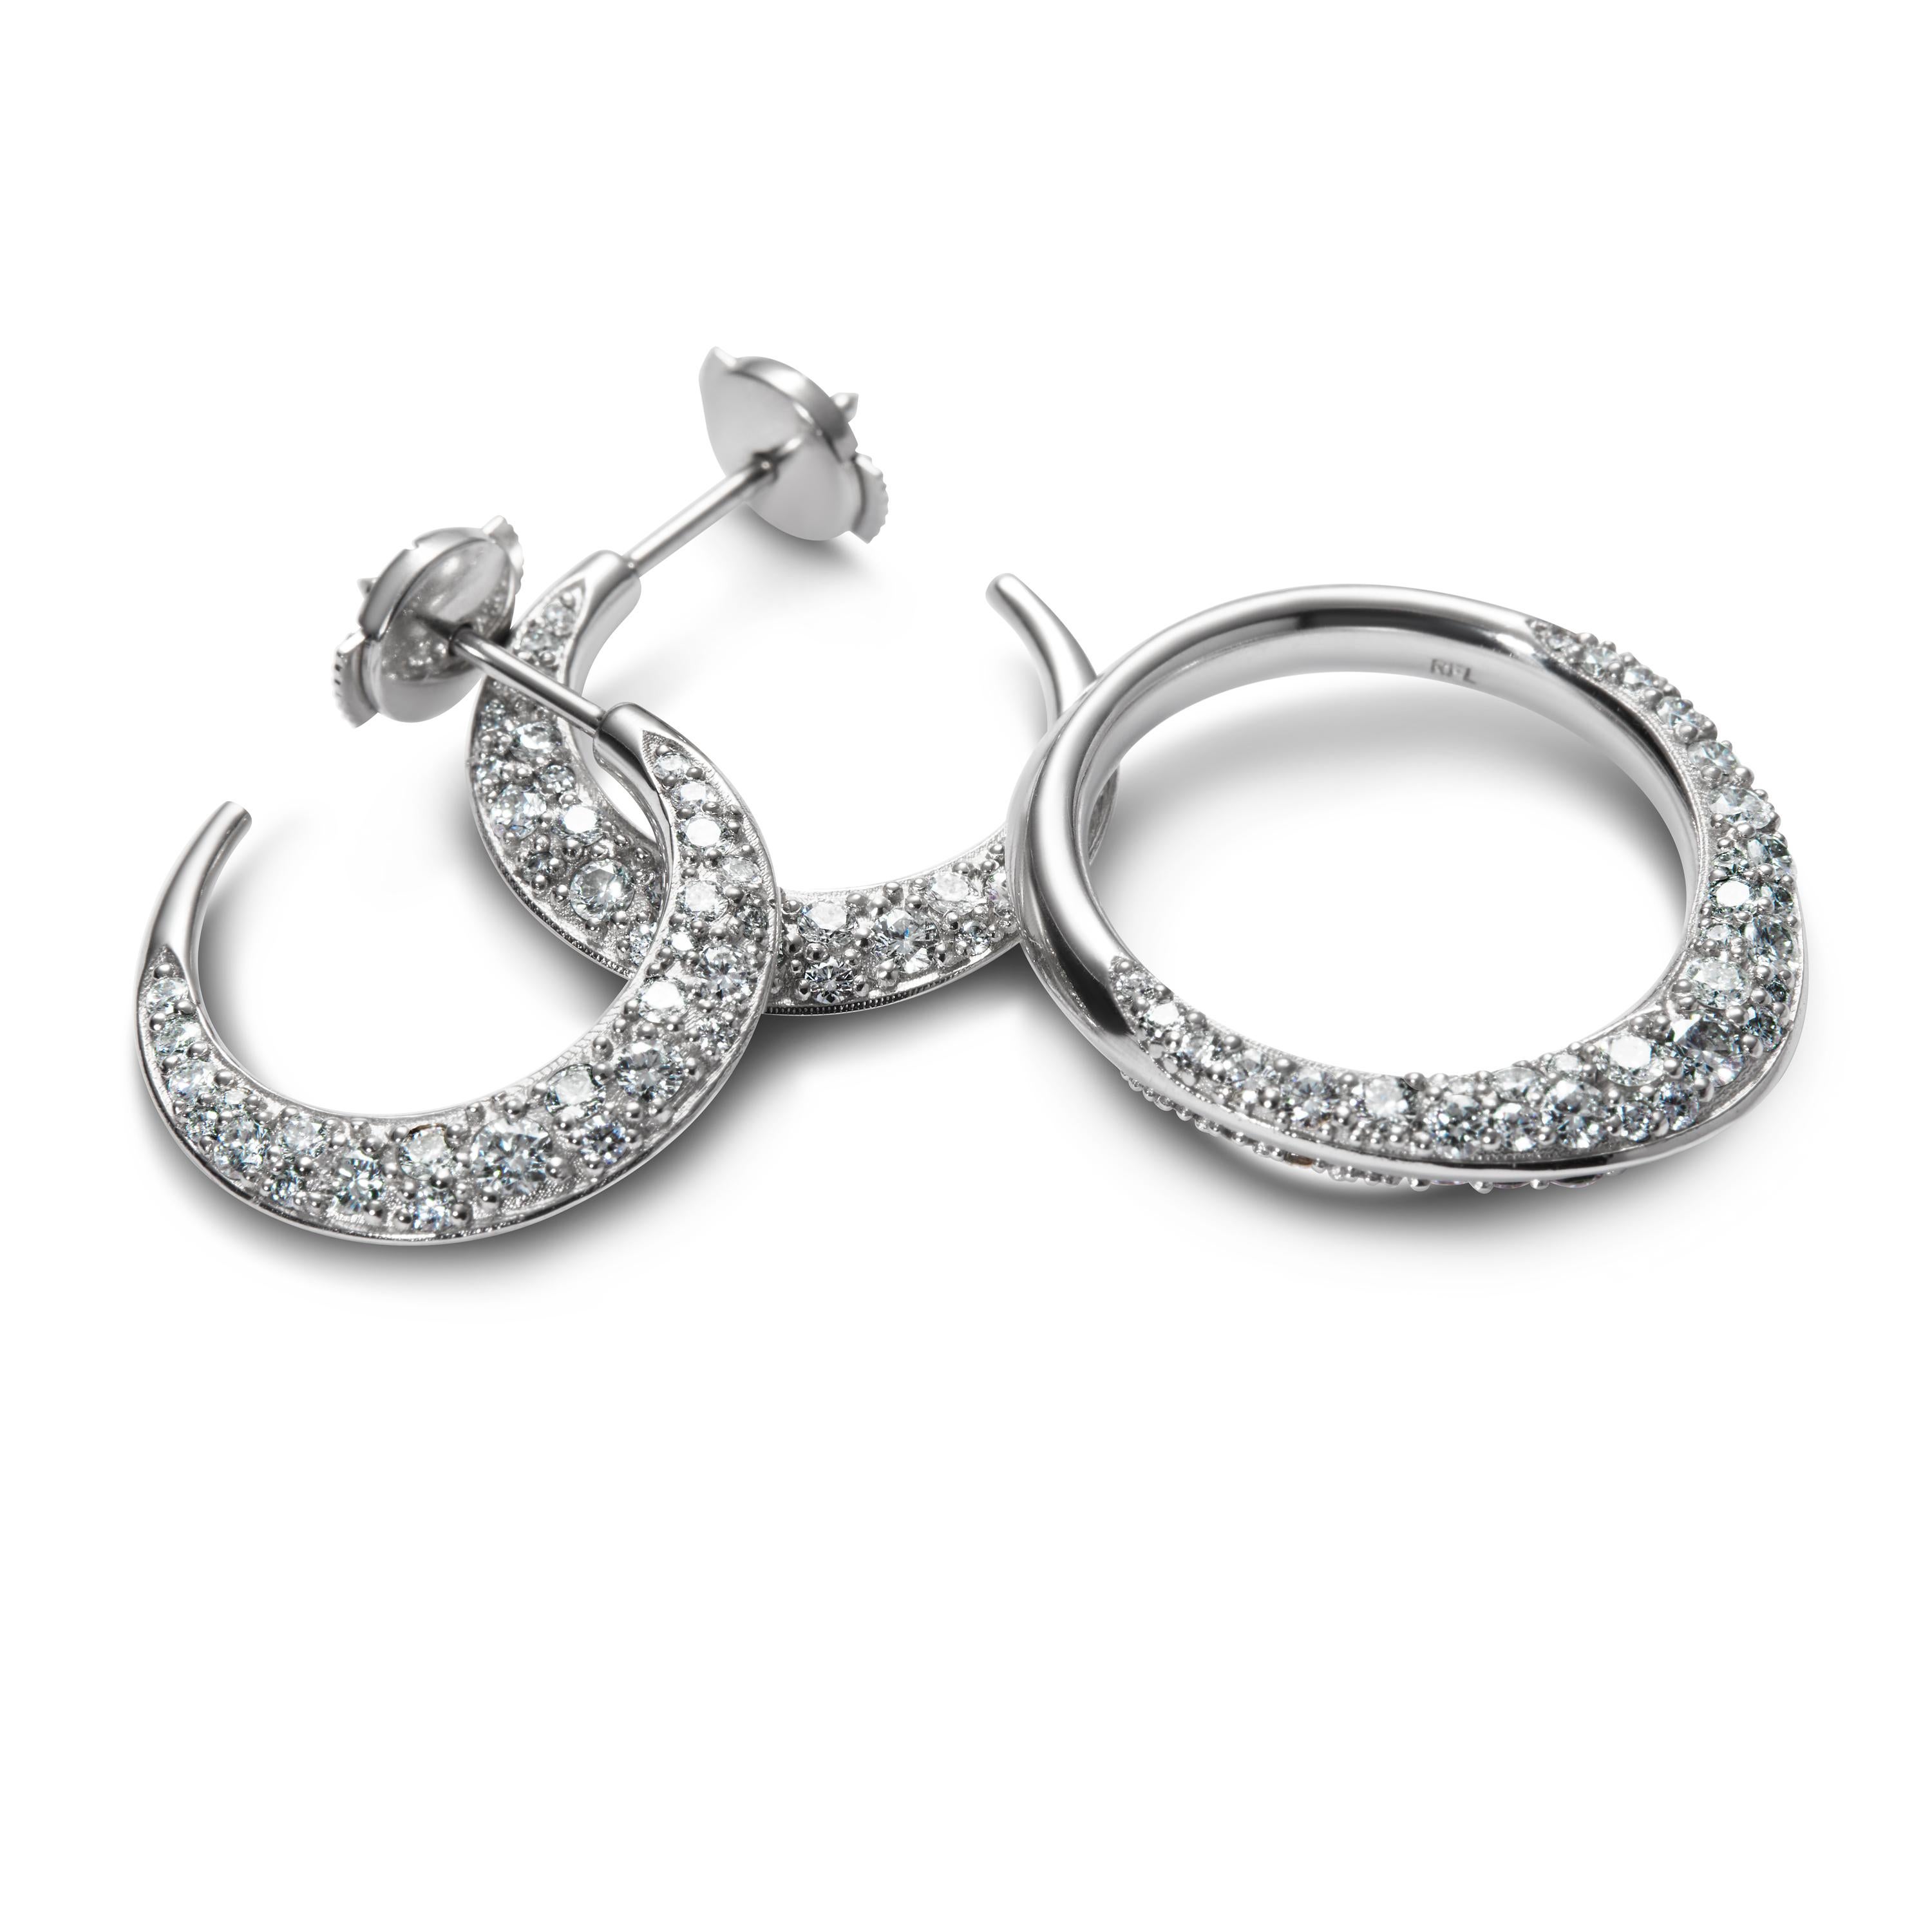 Pavé Earrings Traceable Diamond Size M in 18k White Gold by Rocks For Life In New Condition For Sale In Haddonfield, NJ